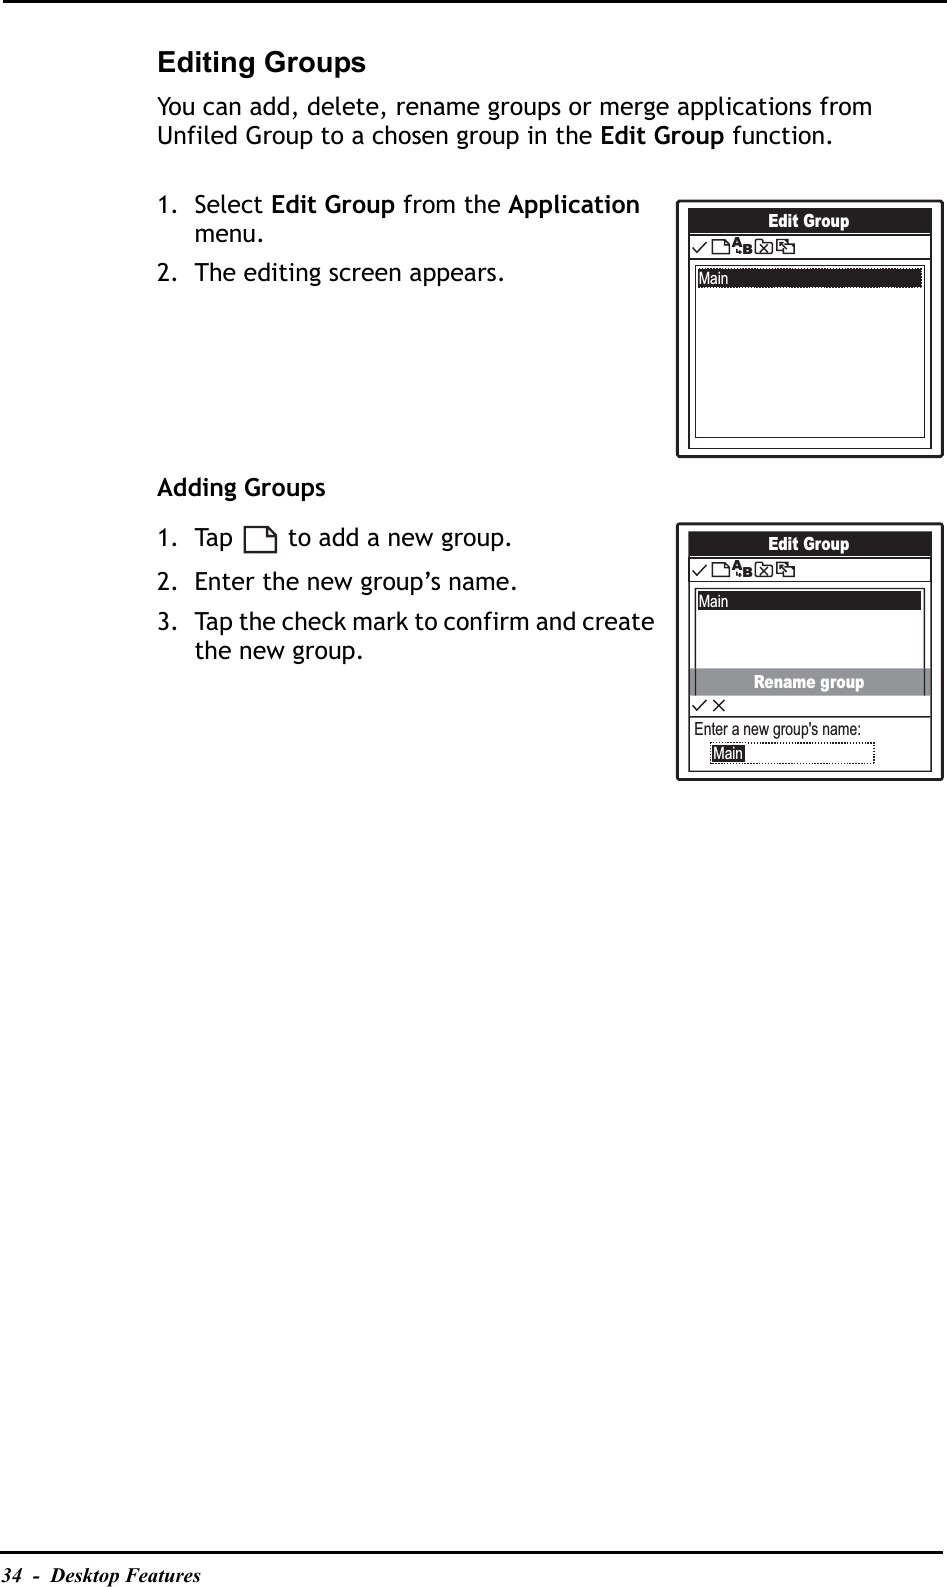 34  -  Desktop FeaturesEditing GroupsYou can add, delete, rename groups or merge applications from Unfiled Group to a chosen group in the Edit Group function.1. Select Edit Group from the Applicationmenu.2. The editing screen appears.Adding Groups1. Tap   to add a new group.2. Enter the new group’s name.3. Tap the check mark to confirm and create the new group.Edit GroupMainABEdit GroupMainABRename groupEnter a new group&apos;s name:Main